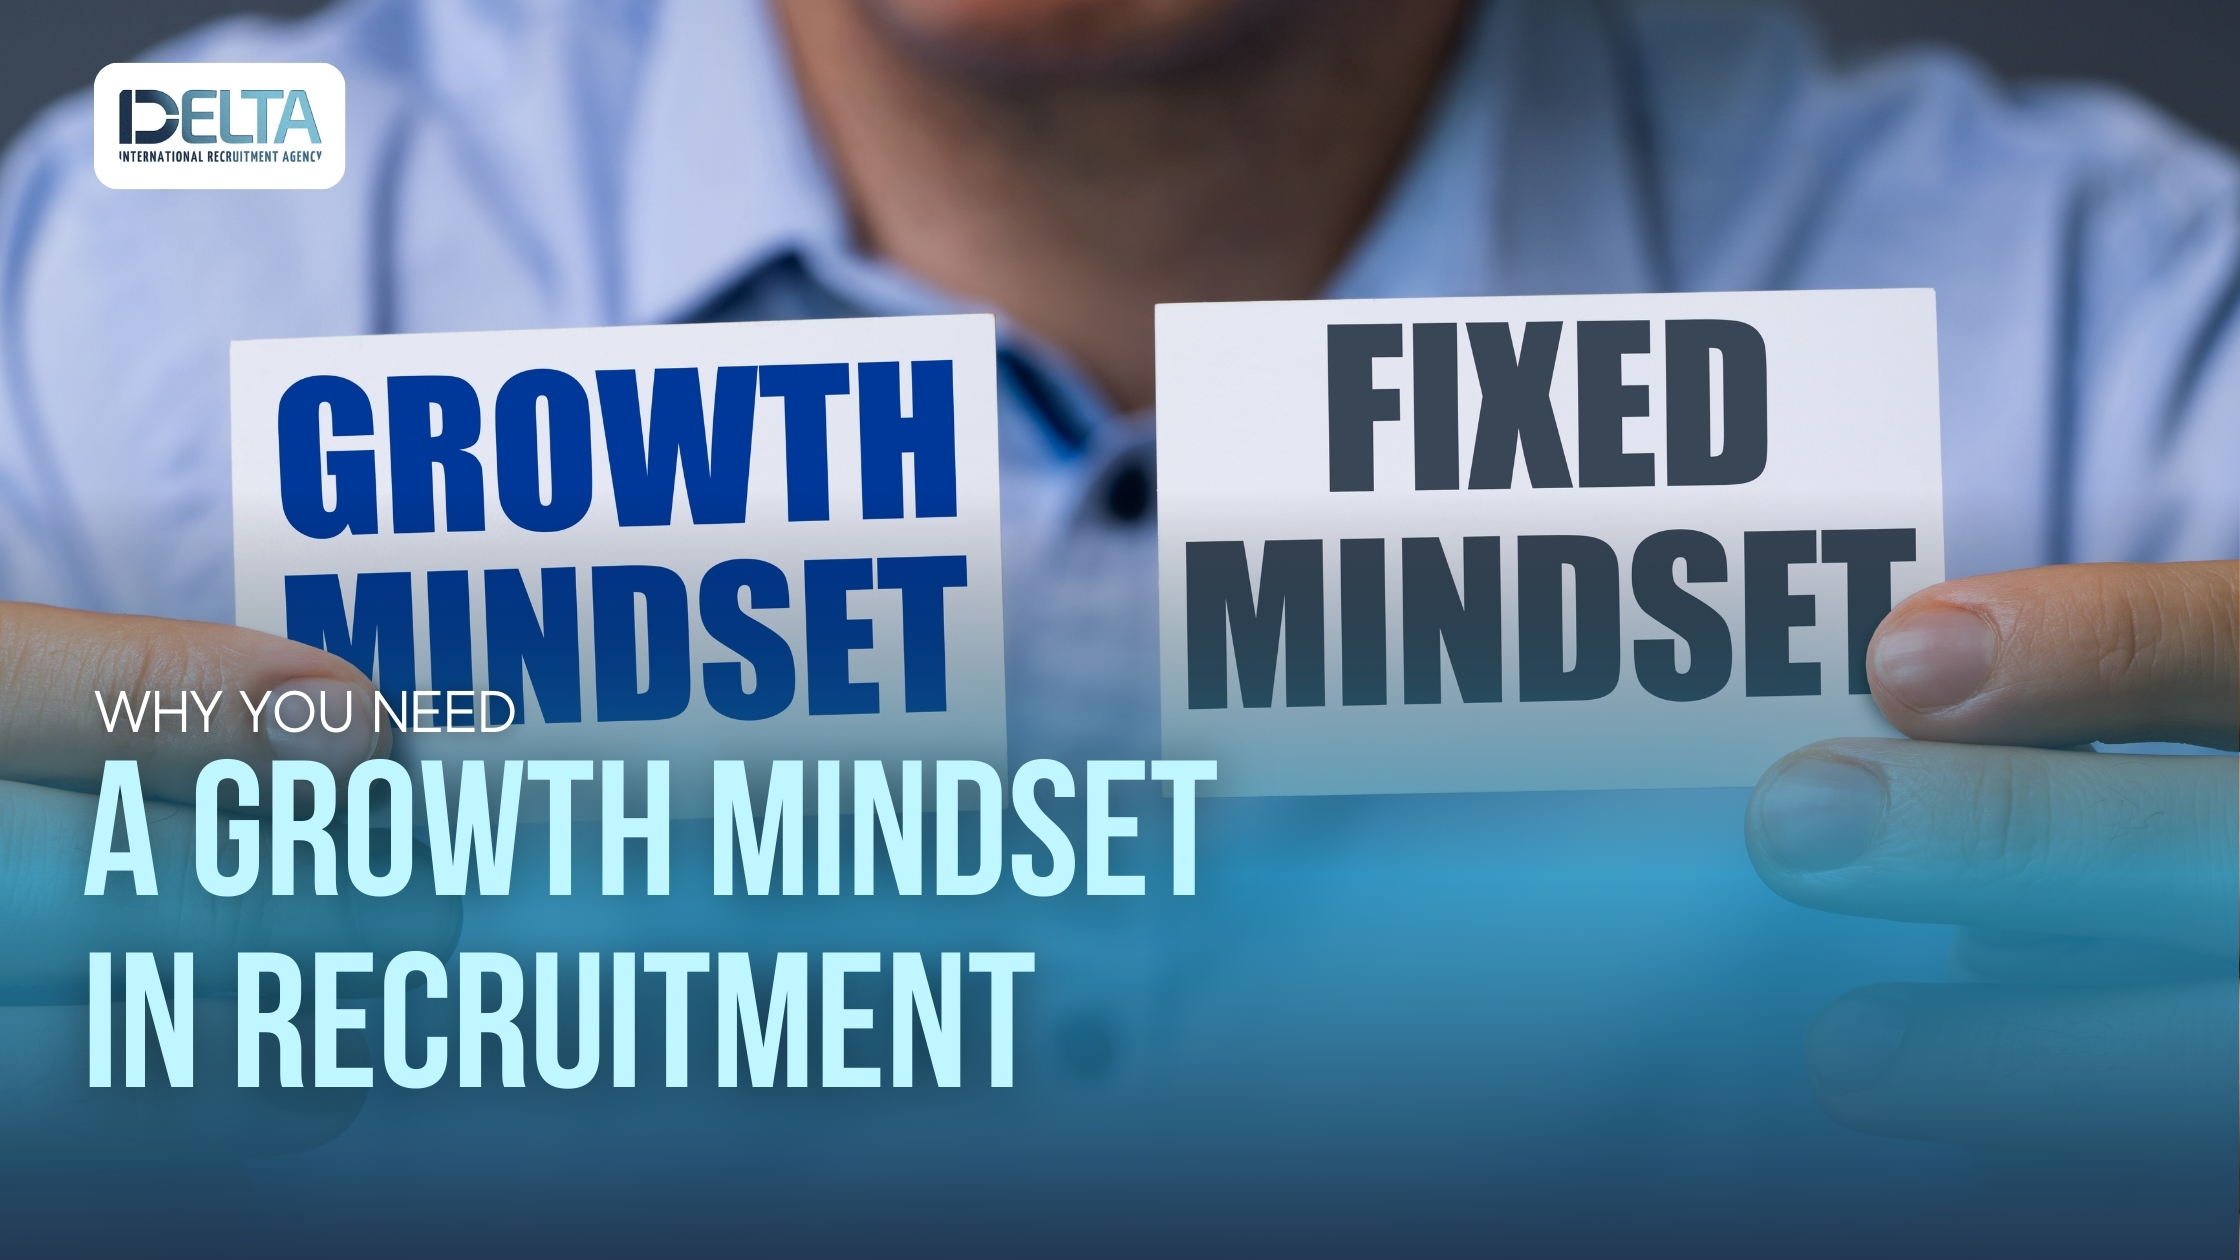 Why You Need a Growth Mindset in Recruitment